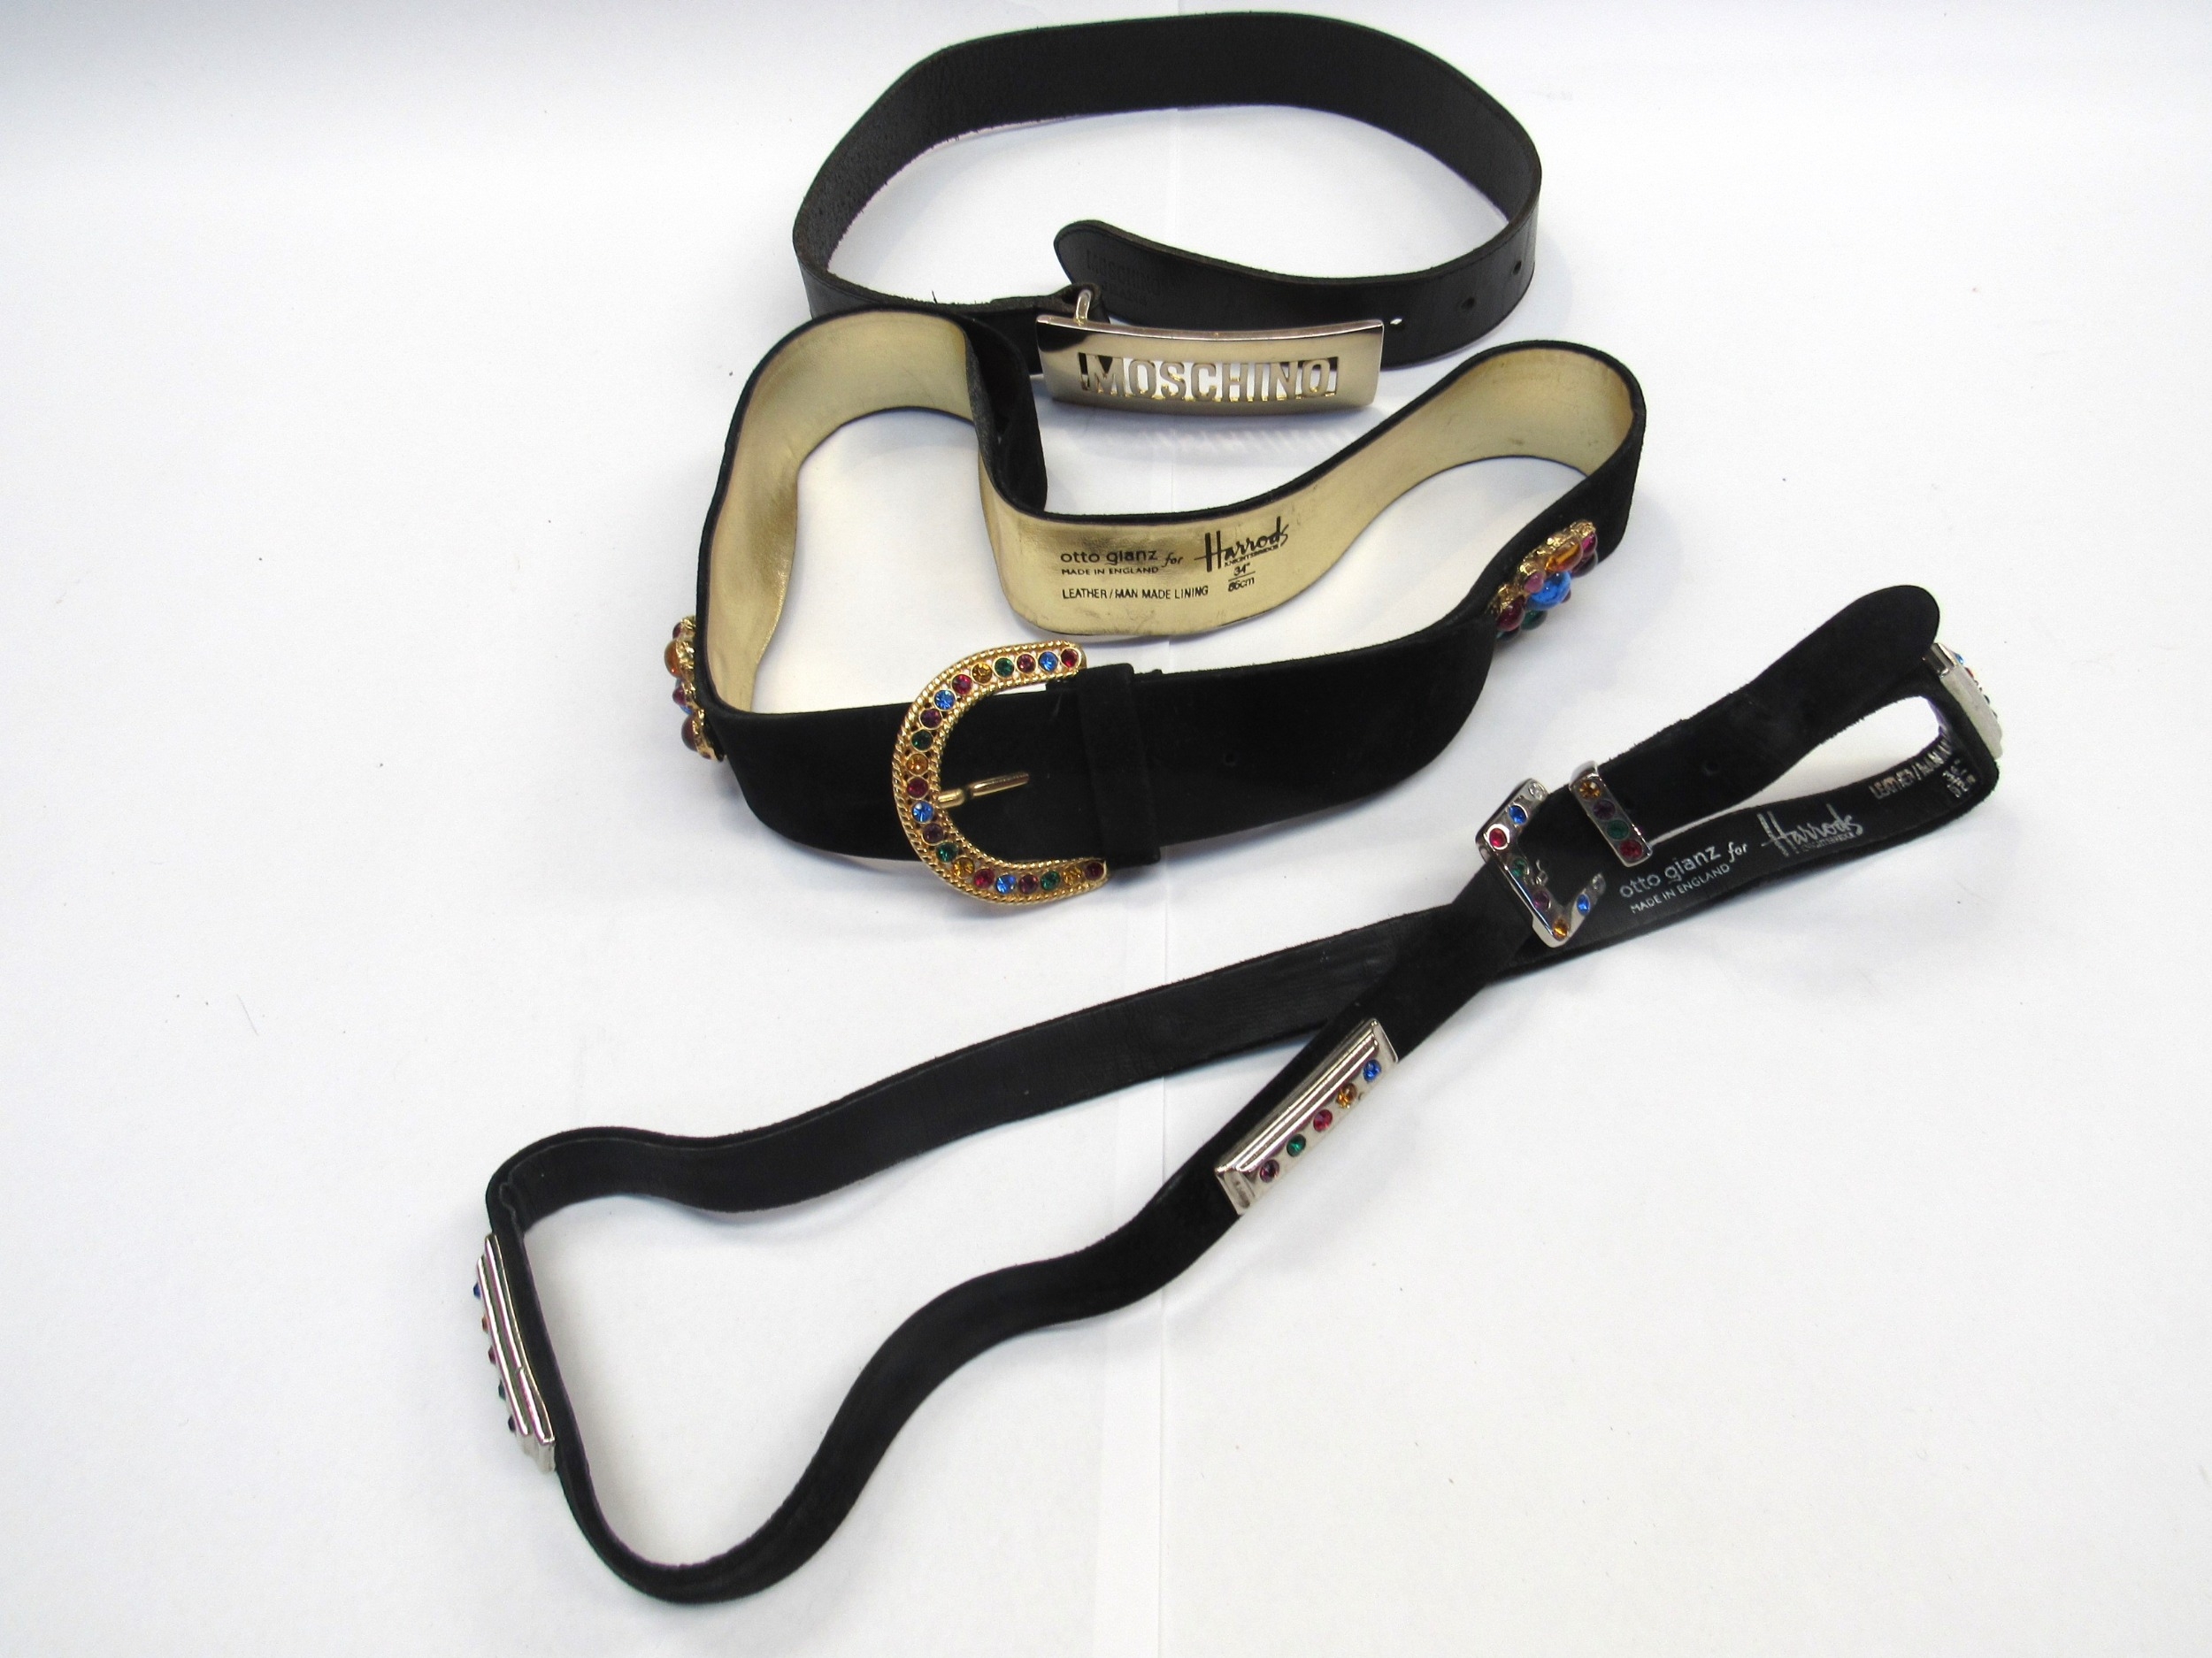 Two Otto Glanz fashion belts for Harrods and a Moschino Jeans black belt with a yellow metal buckle